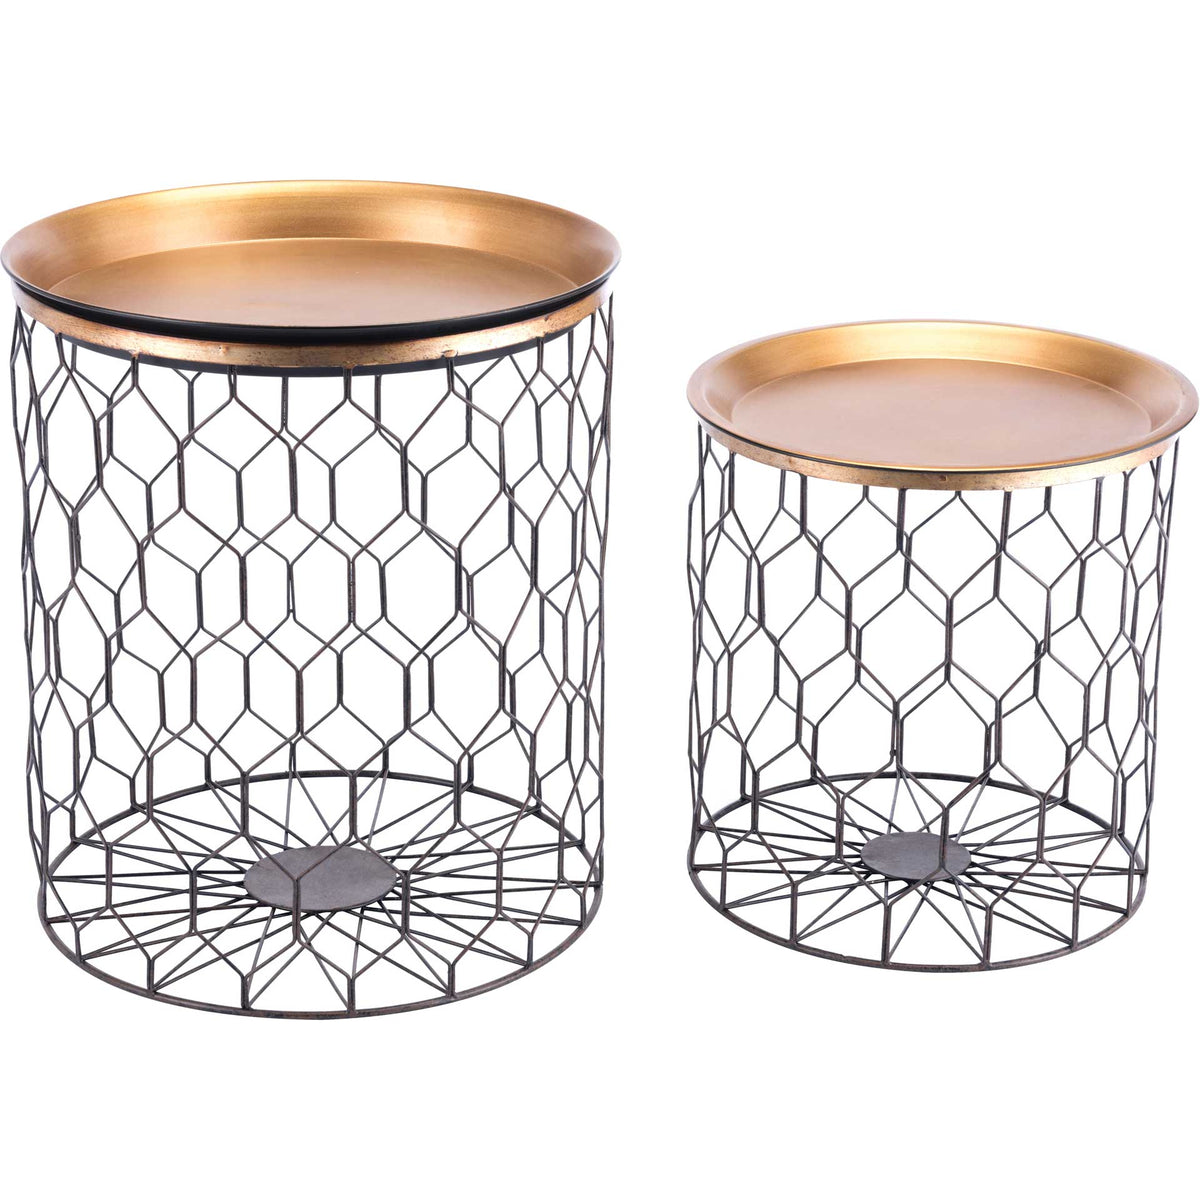 Oriente Table Gold (Set of 2)